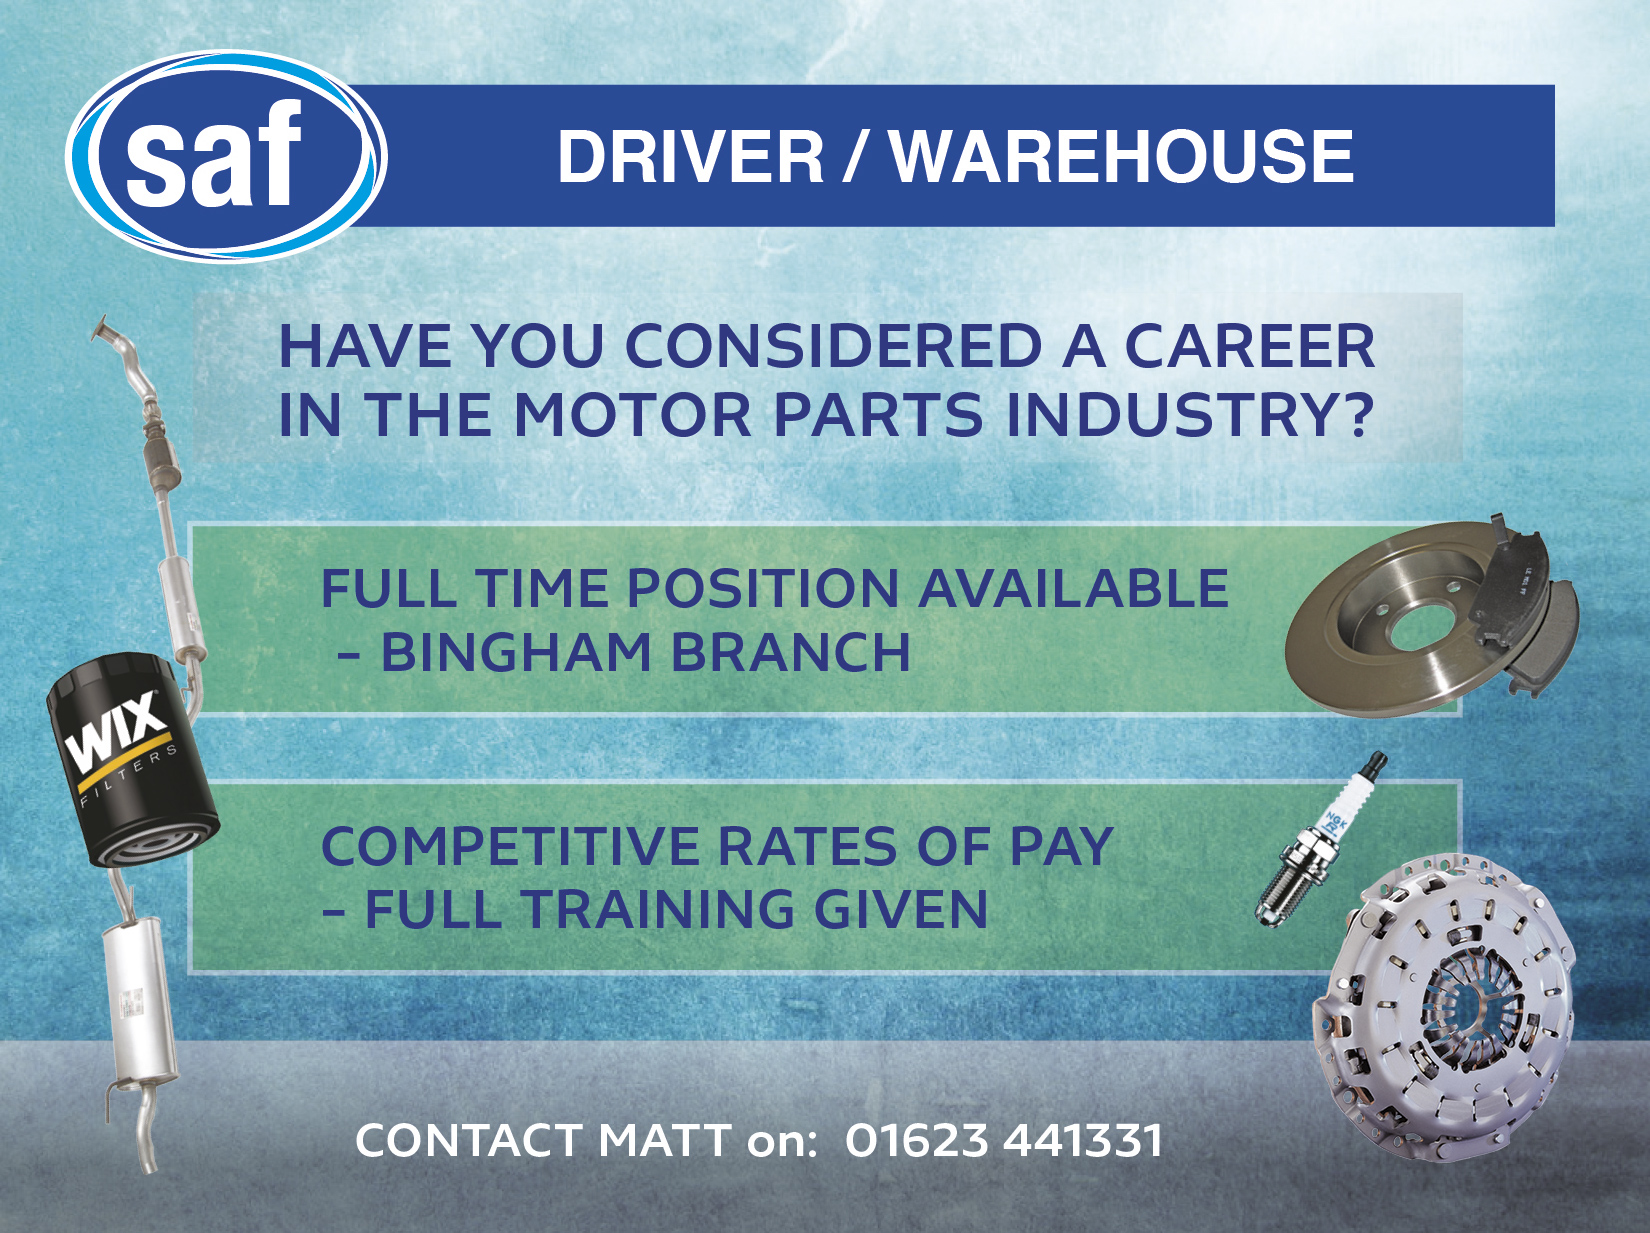 Driver/Warehouse Assistant full time position available at Bingham branch of Sutton Auto Factors